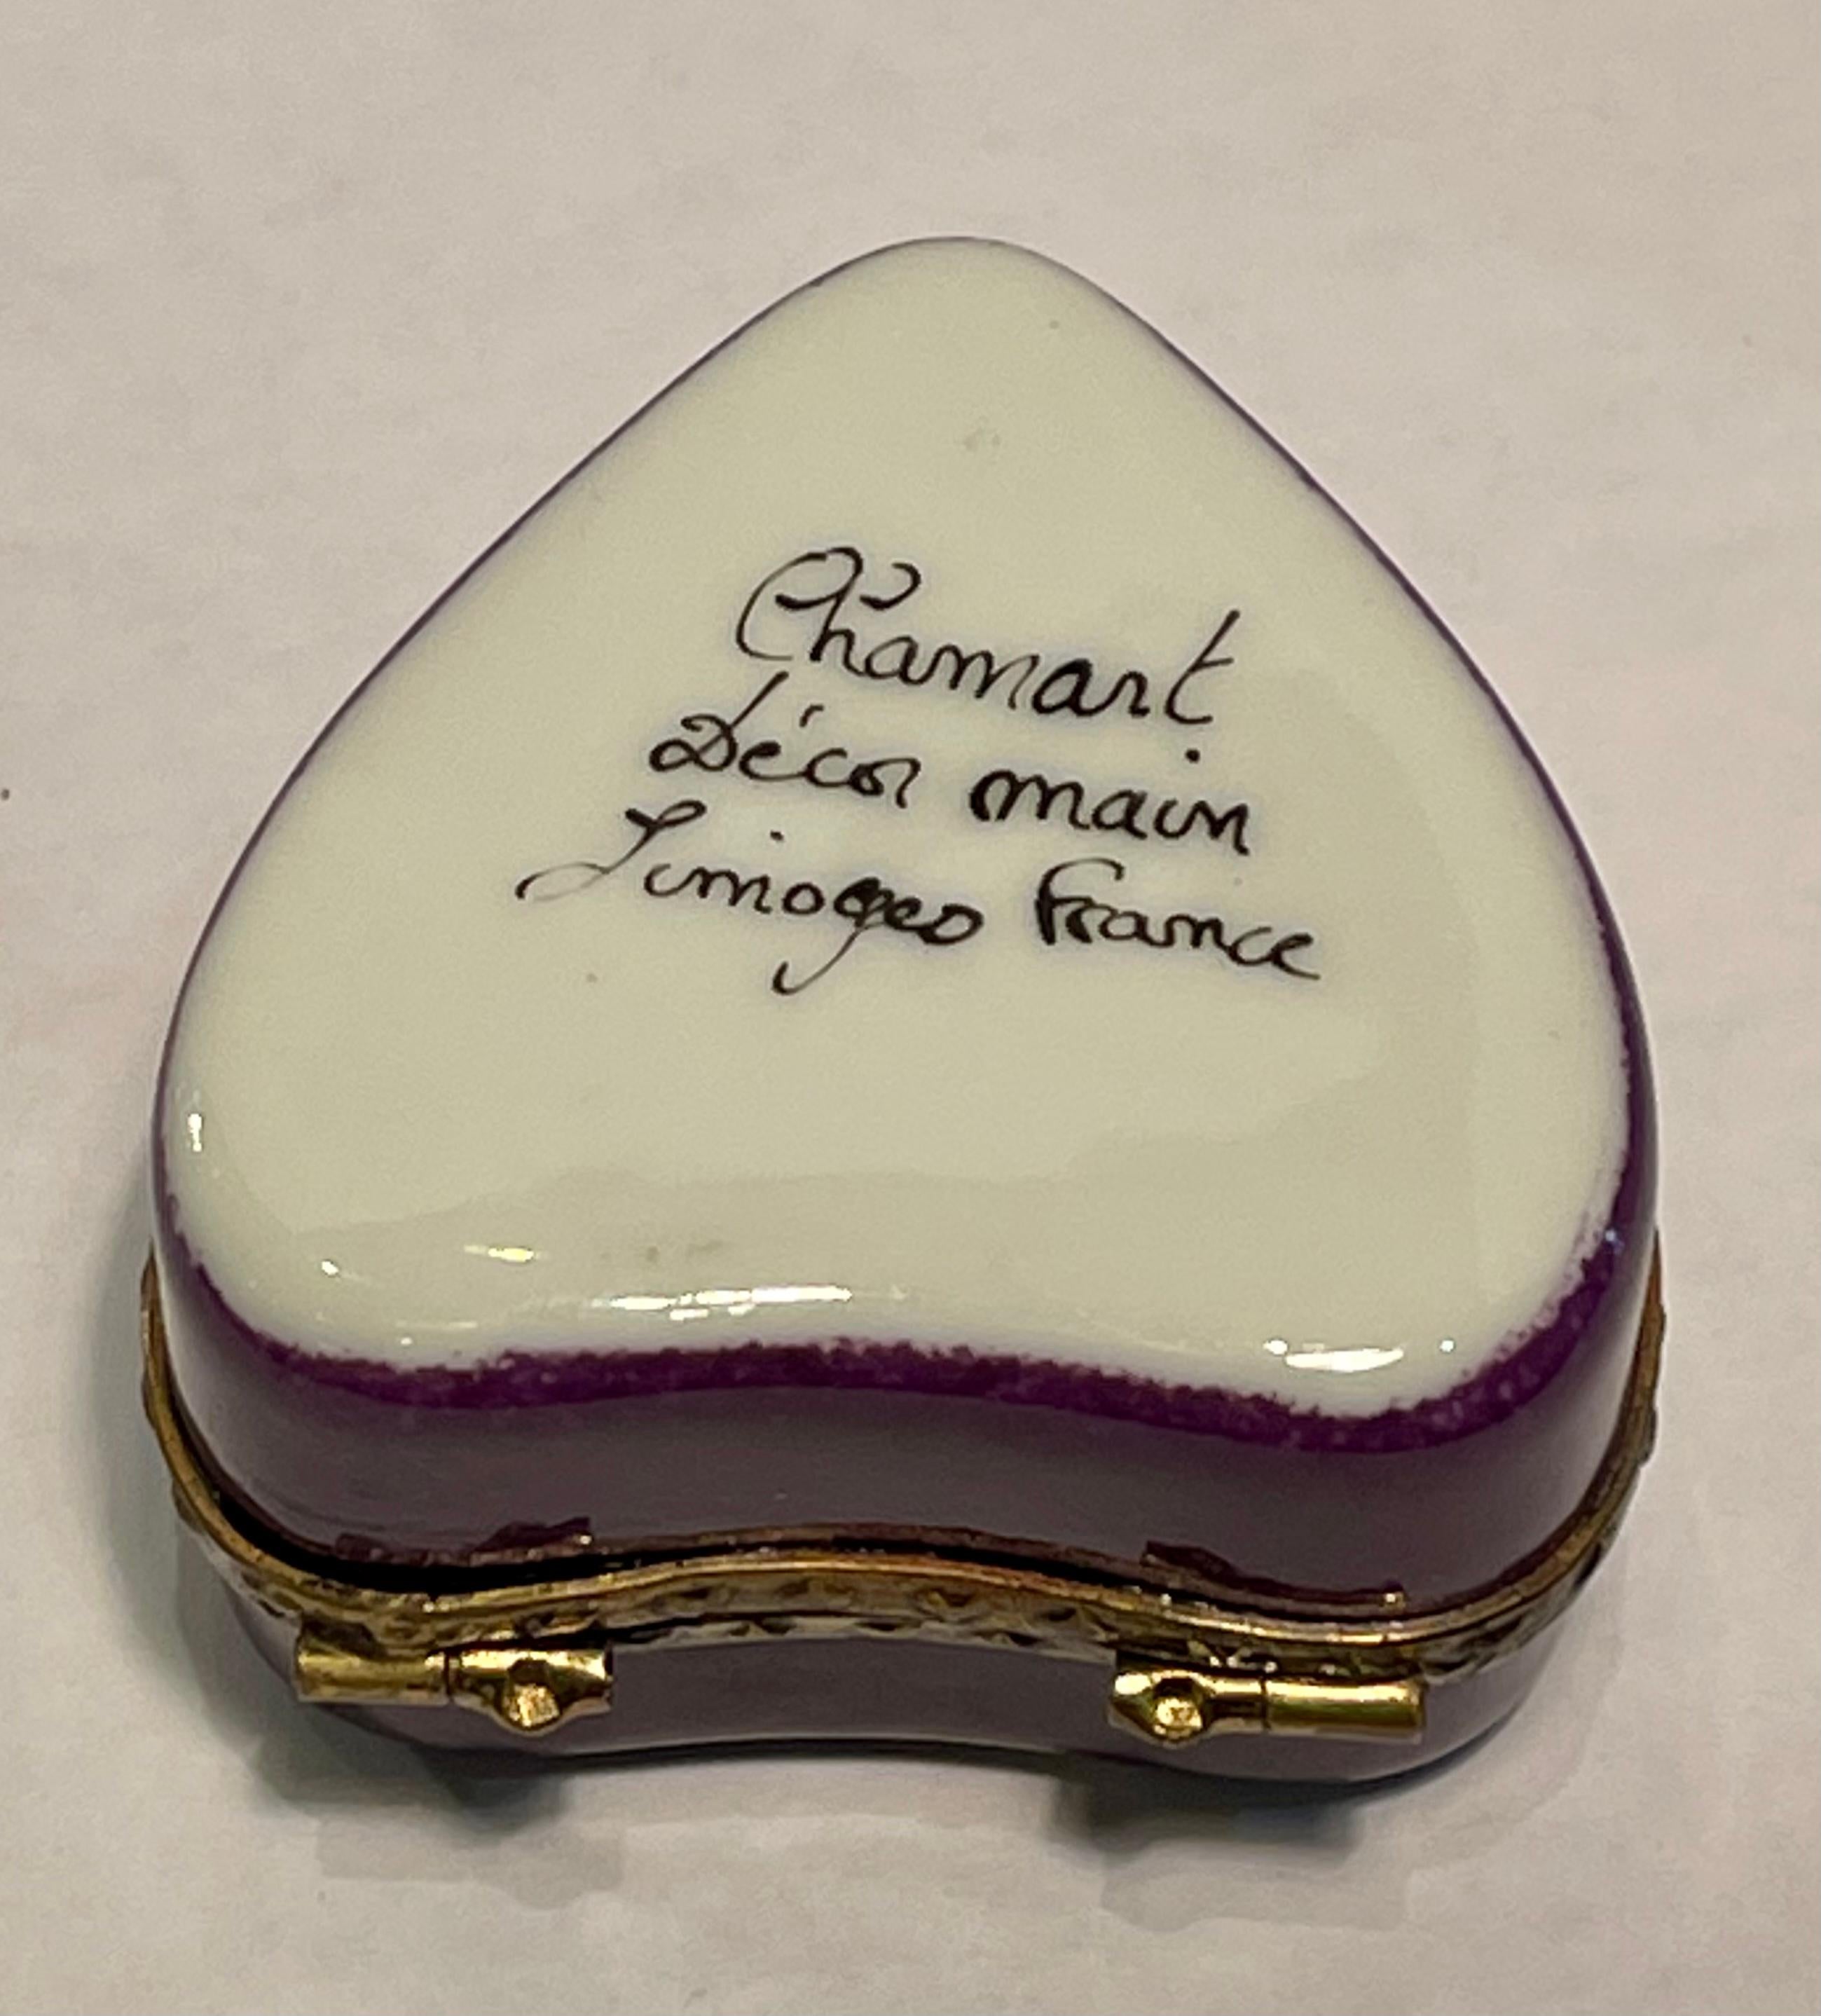 Hand-Crafted Pretty Limoges France Heart Shaped Hand Painted Porcelain Box